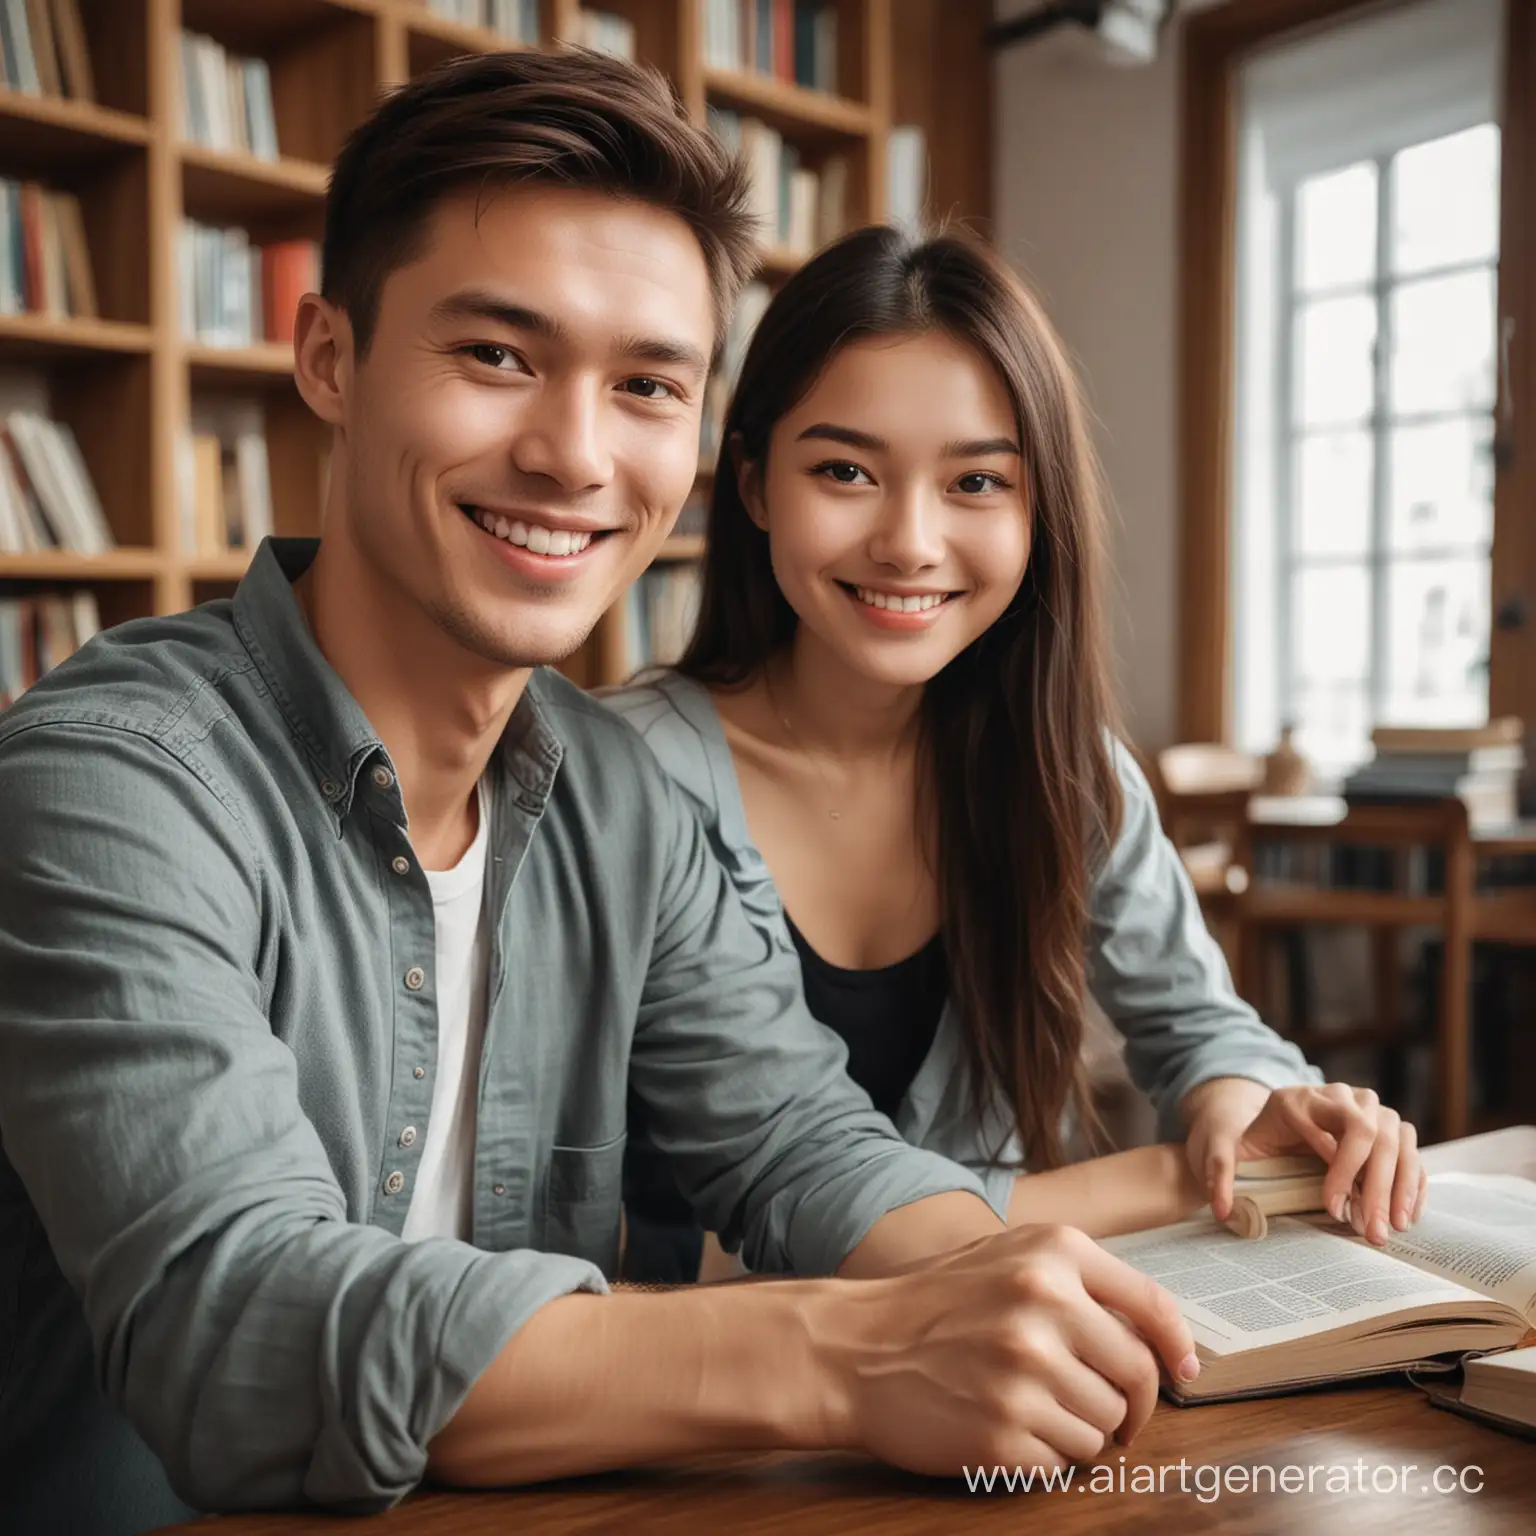 Multicultural-Friendship-Chinese-Girl-and-Russian-Guy-Reading-Books-in-a-Bright-Library